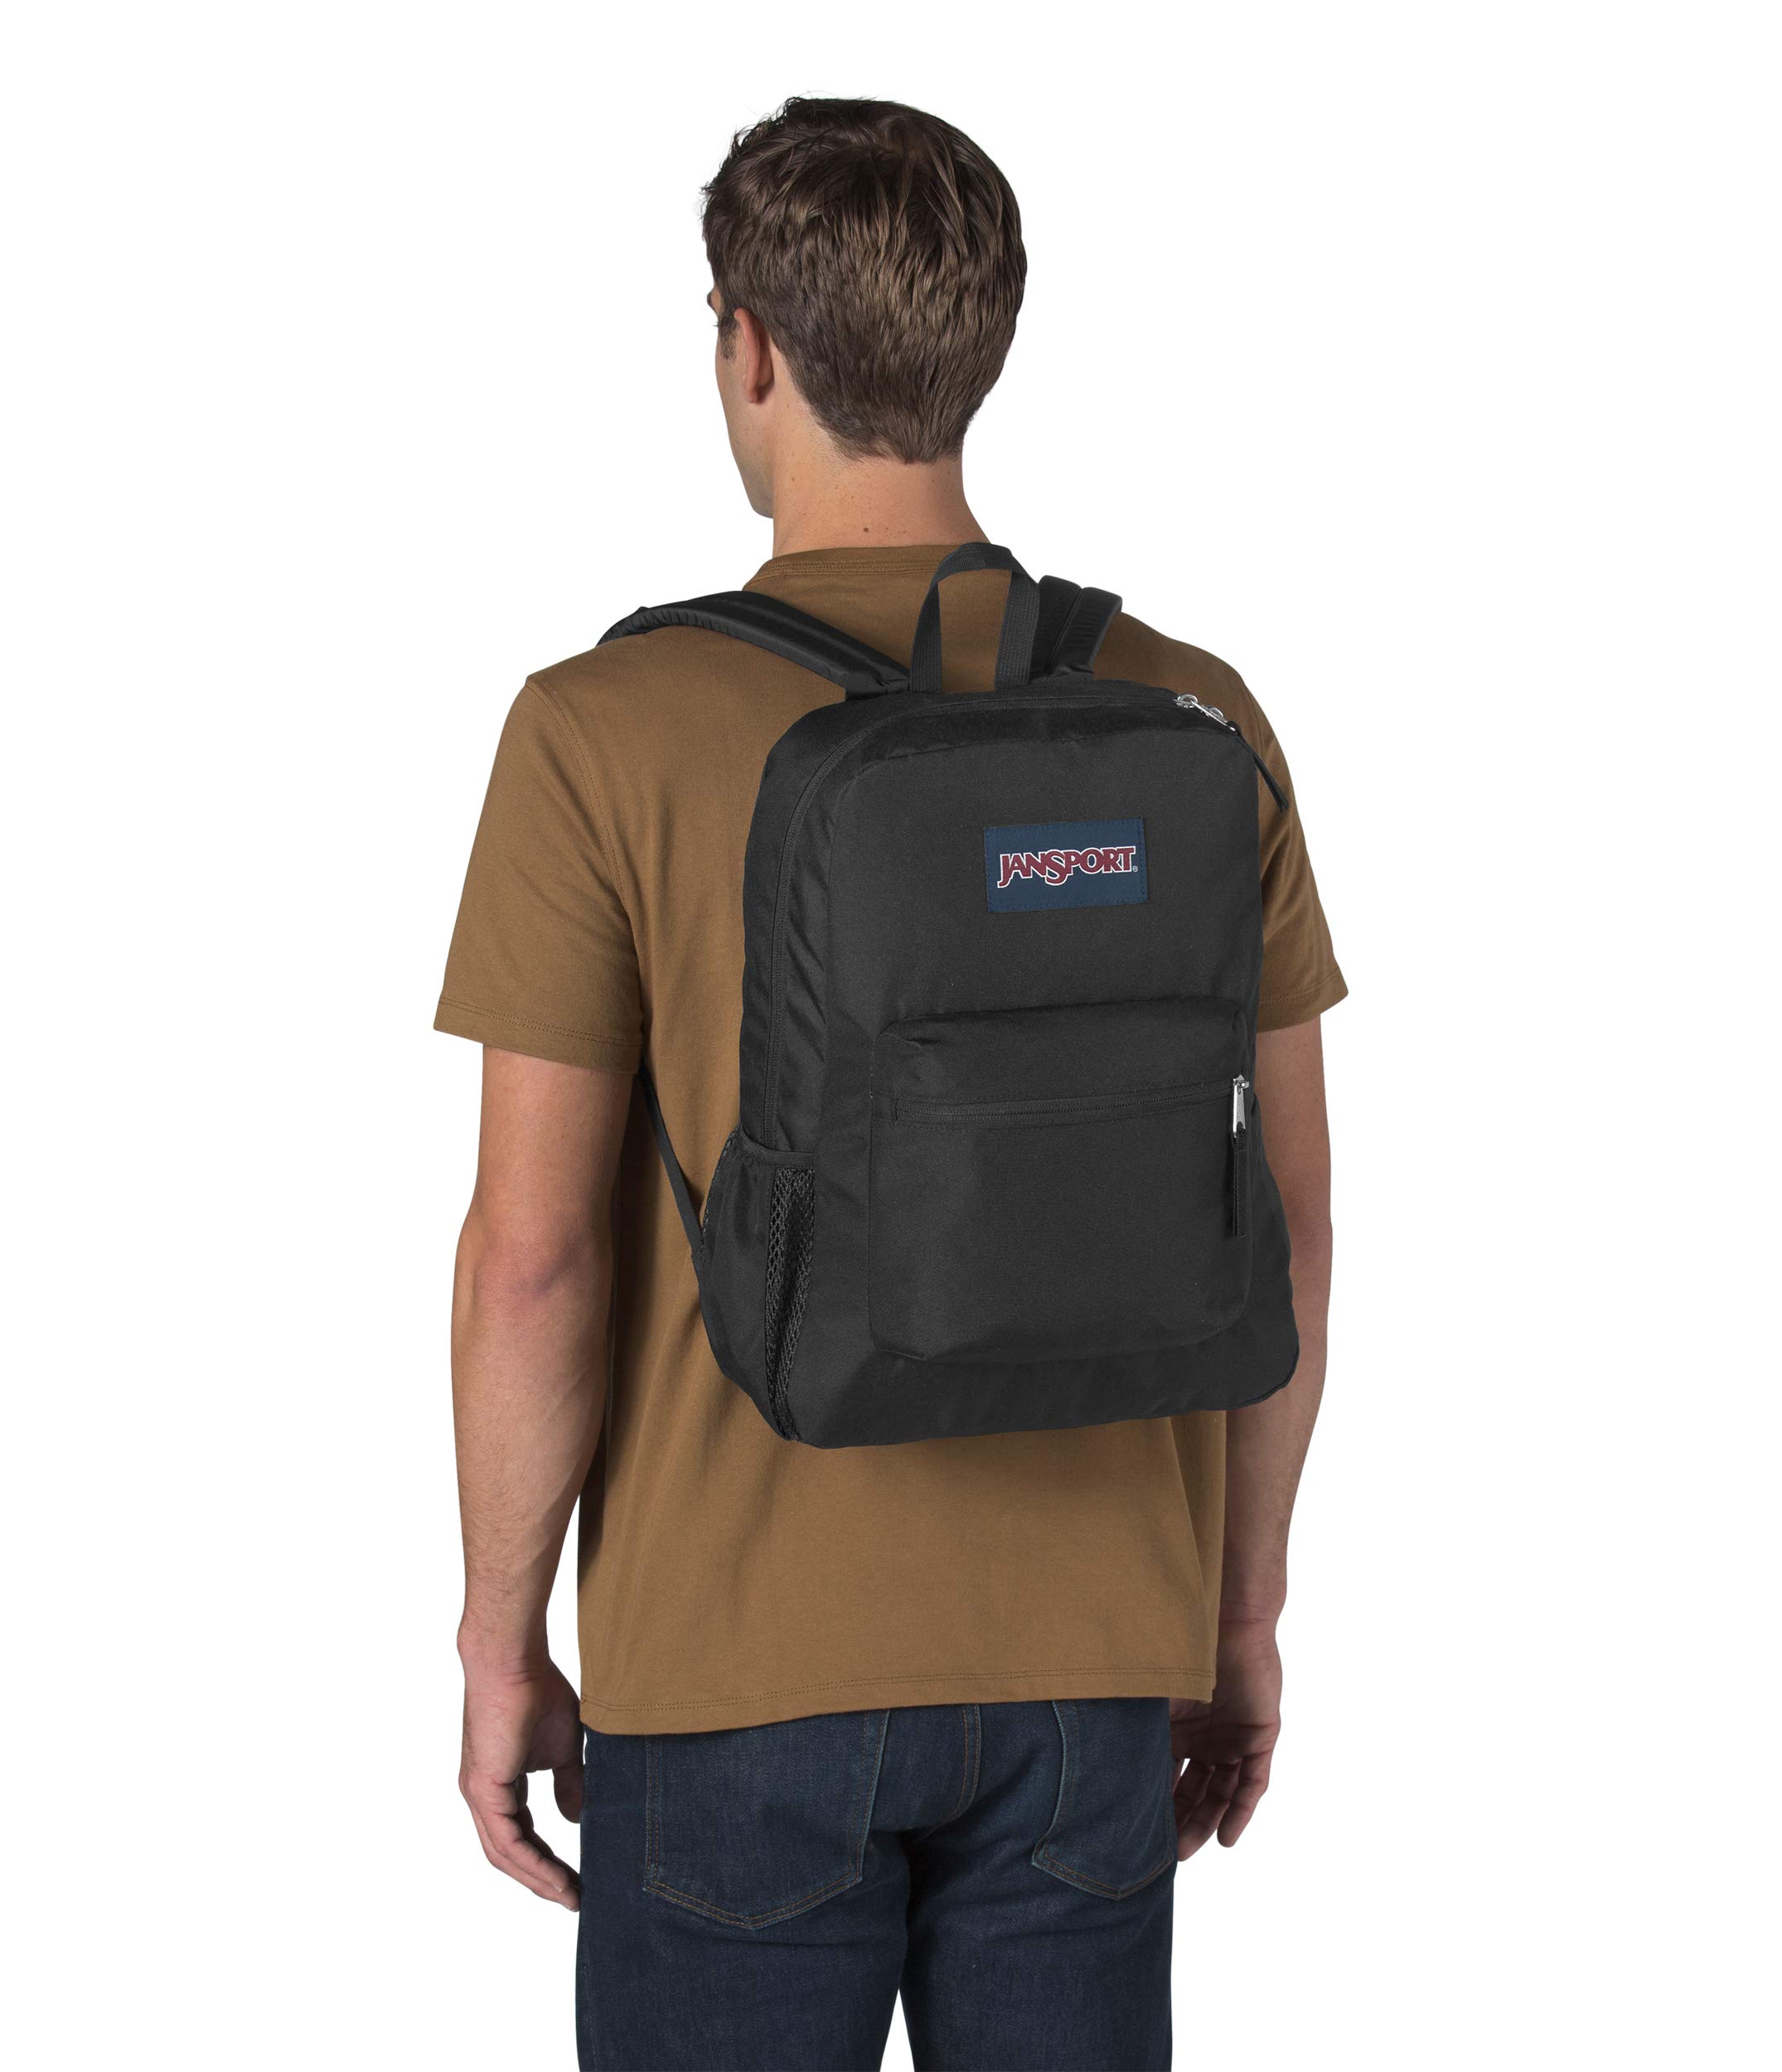 JanSport Cross Town Backpack, Black, One Size